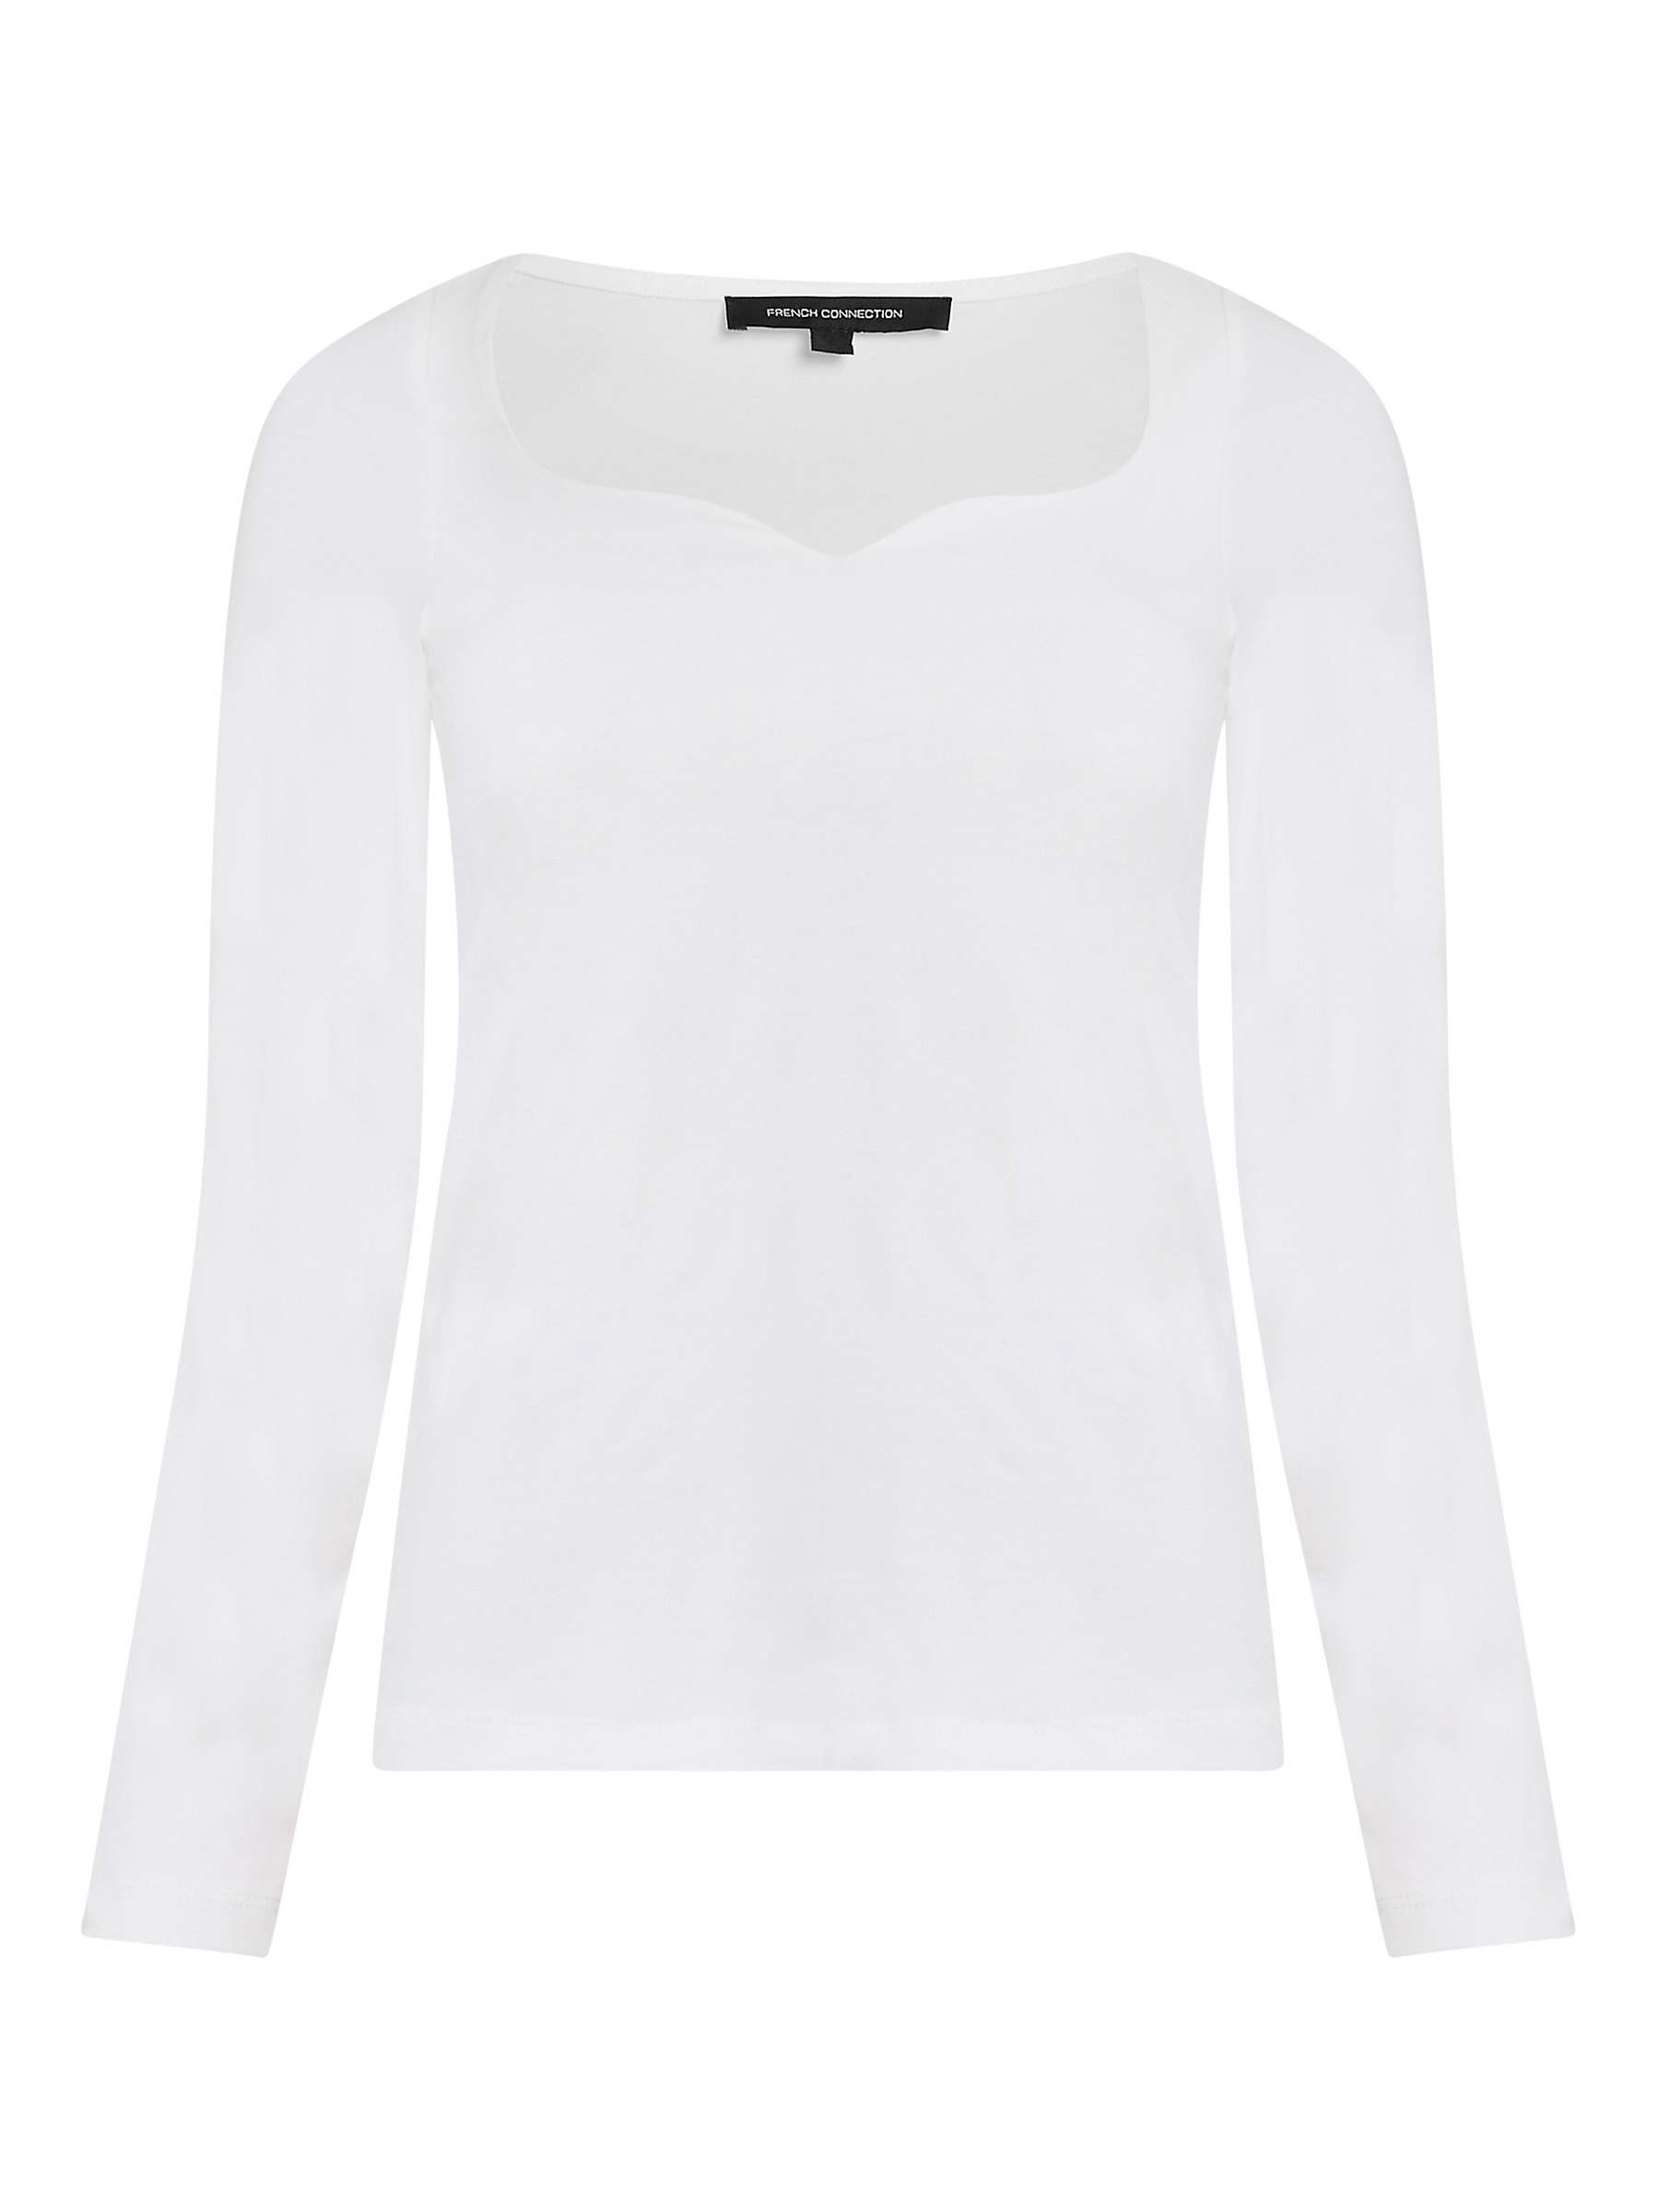 Buy French Connection Rallie Top, Winter White Online at johnlewis.com